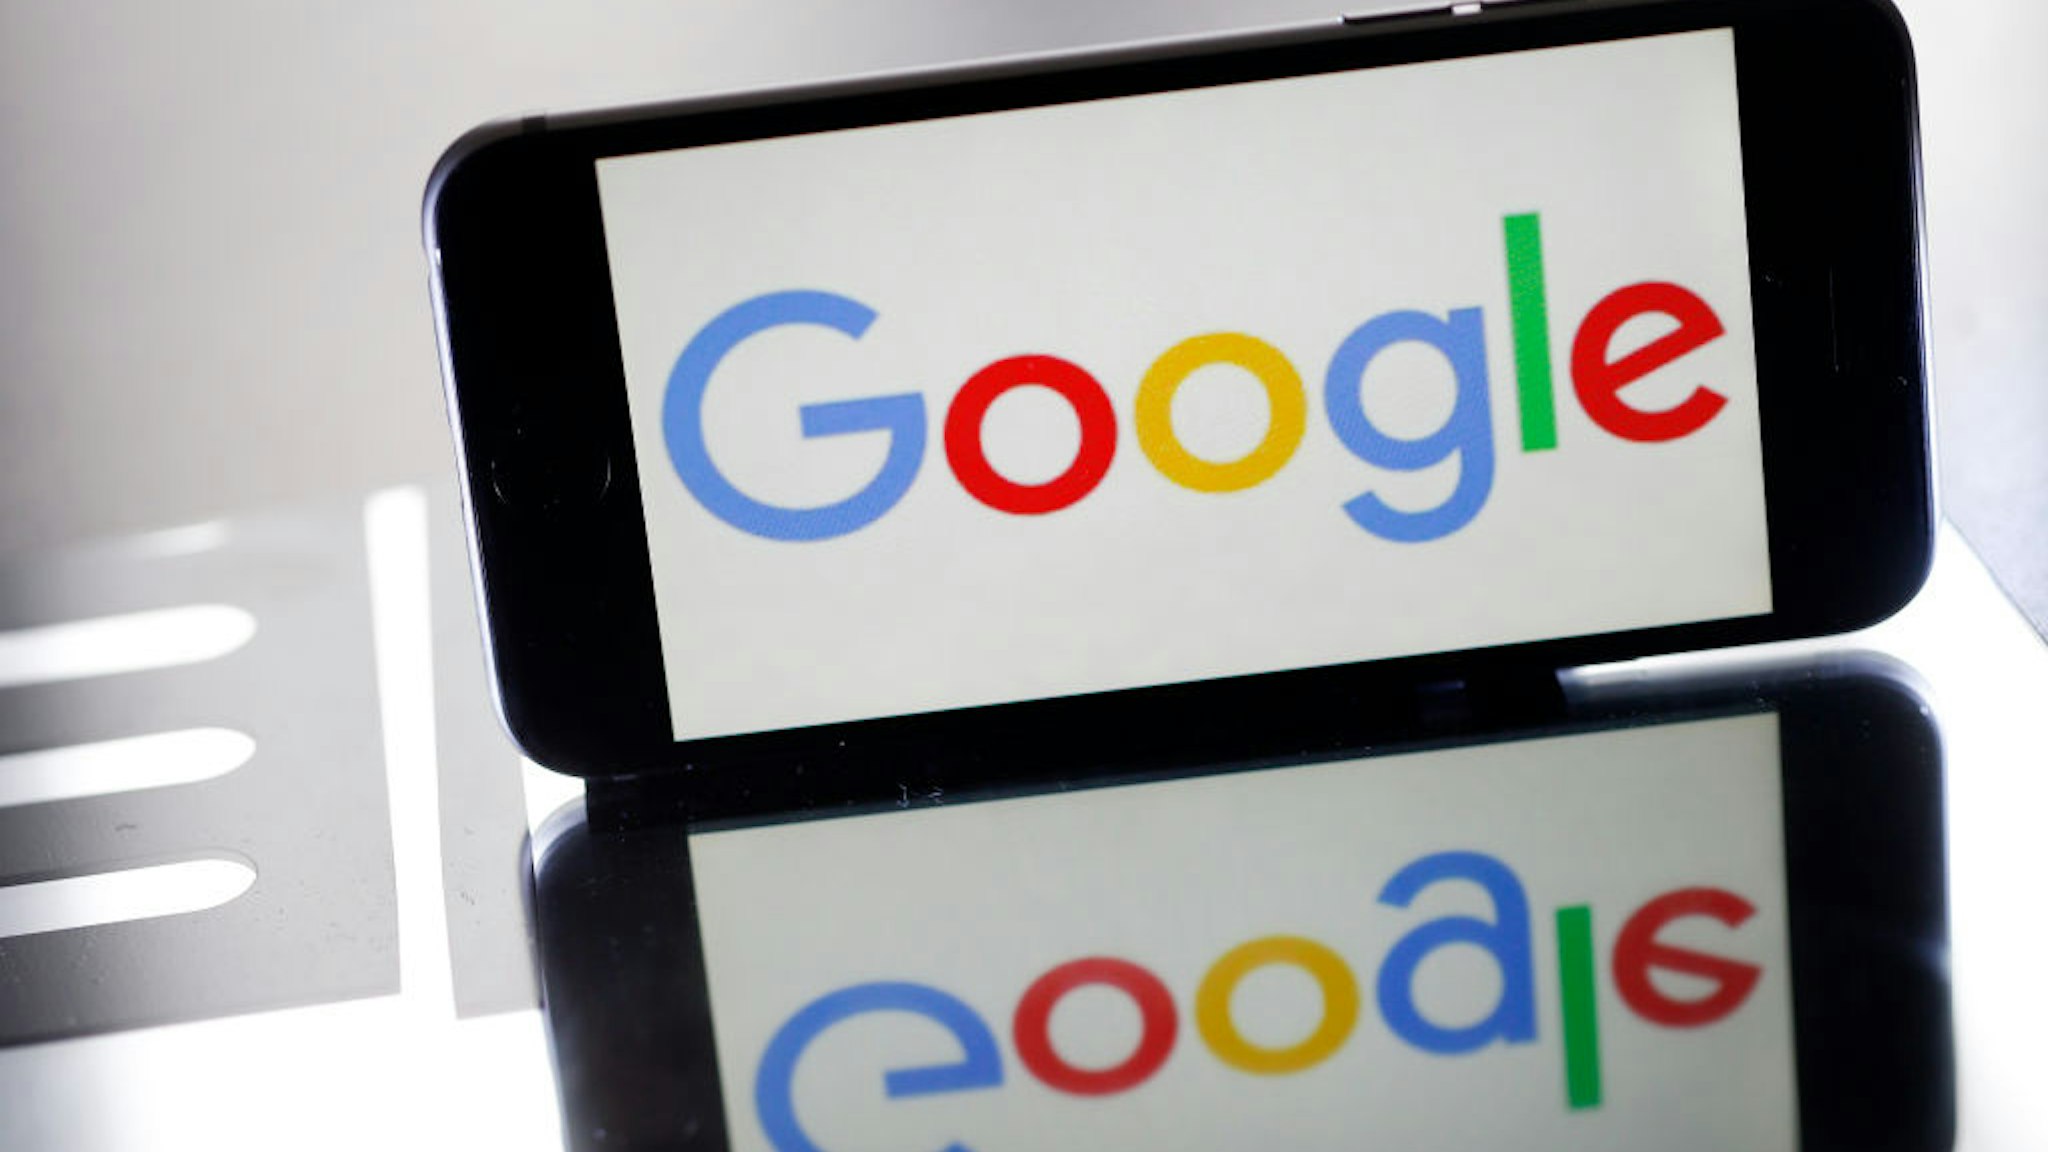 In this photo illustration, the Google logo is displayed on the screen of an iPhone on March 20, 2019 in Paris, France.